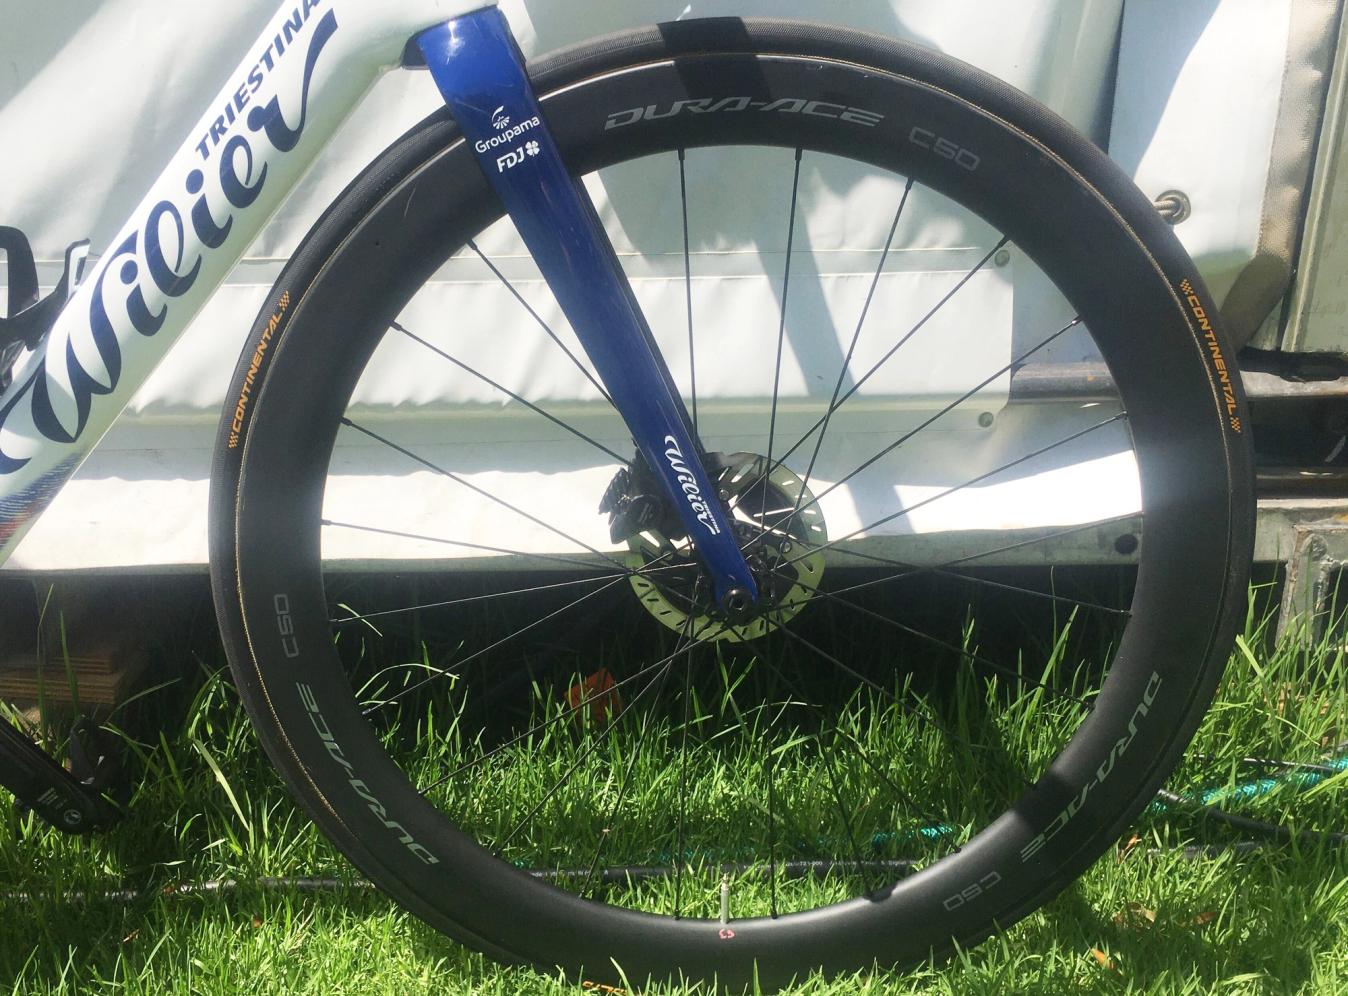 Tubulars have been taken over by tubeless set-ups